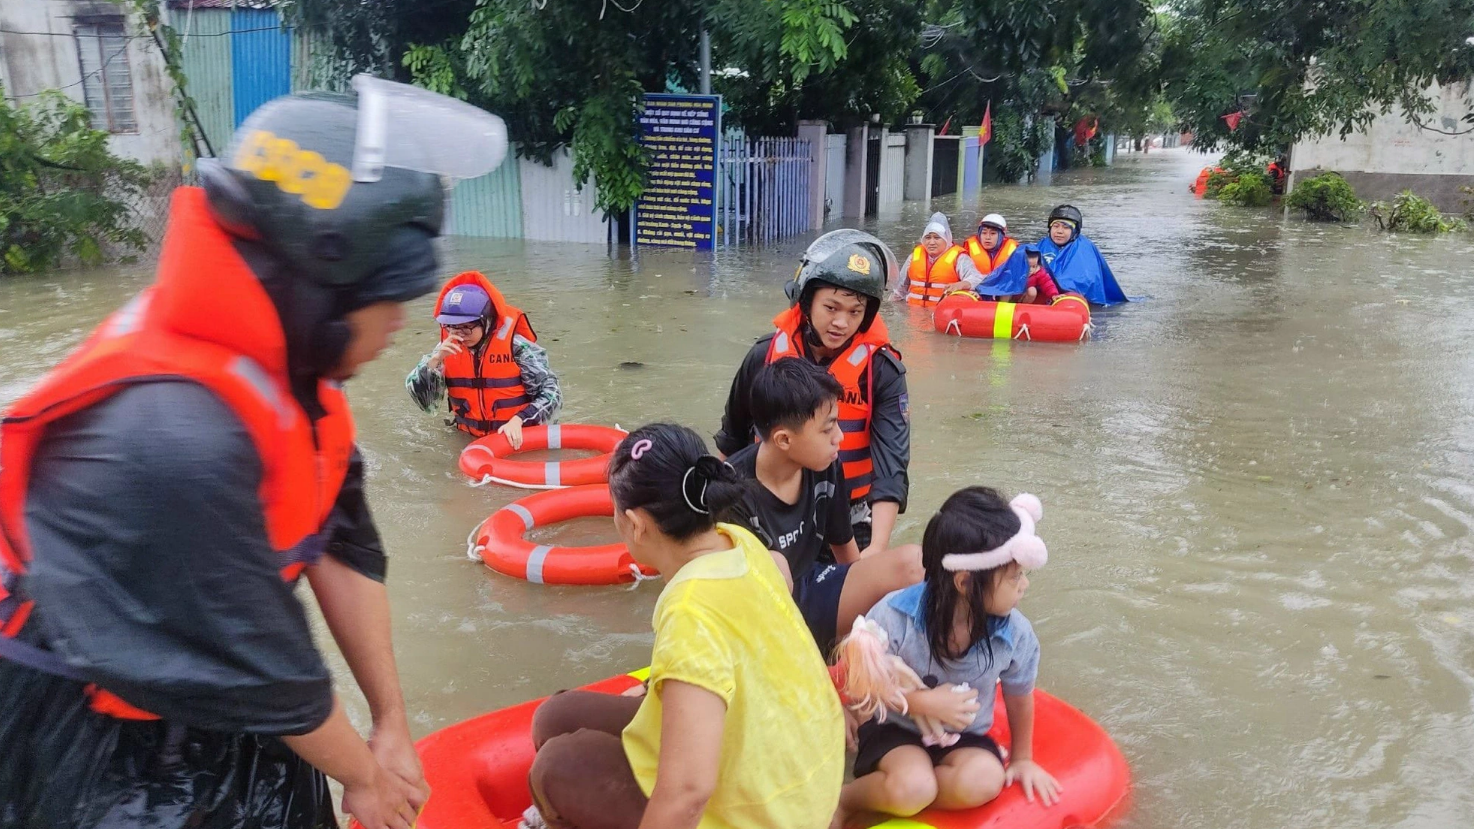 Police struggle with floods to rescue residents in Da Nang City